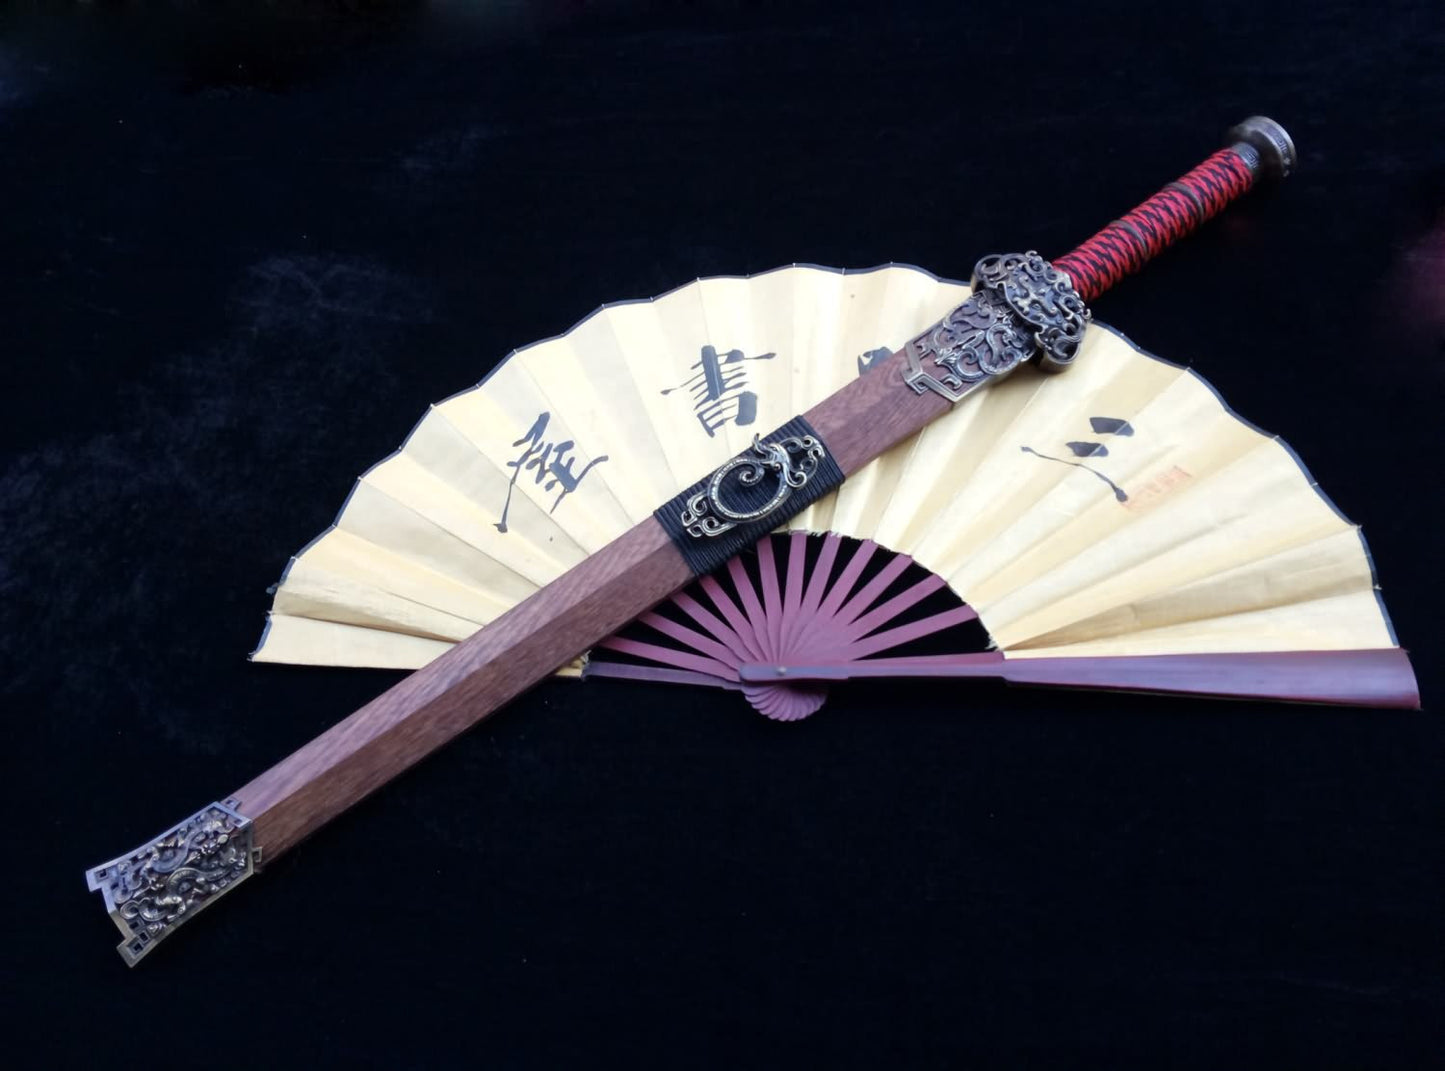 Talisman sword(High carbon steel blade,Rosewood,Alloy fitted)Length 30" - Chinese sword shop